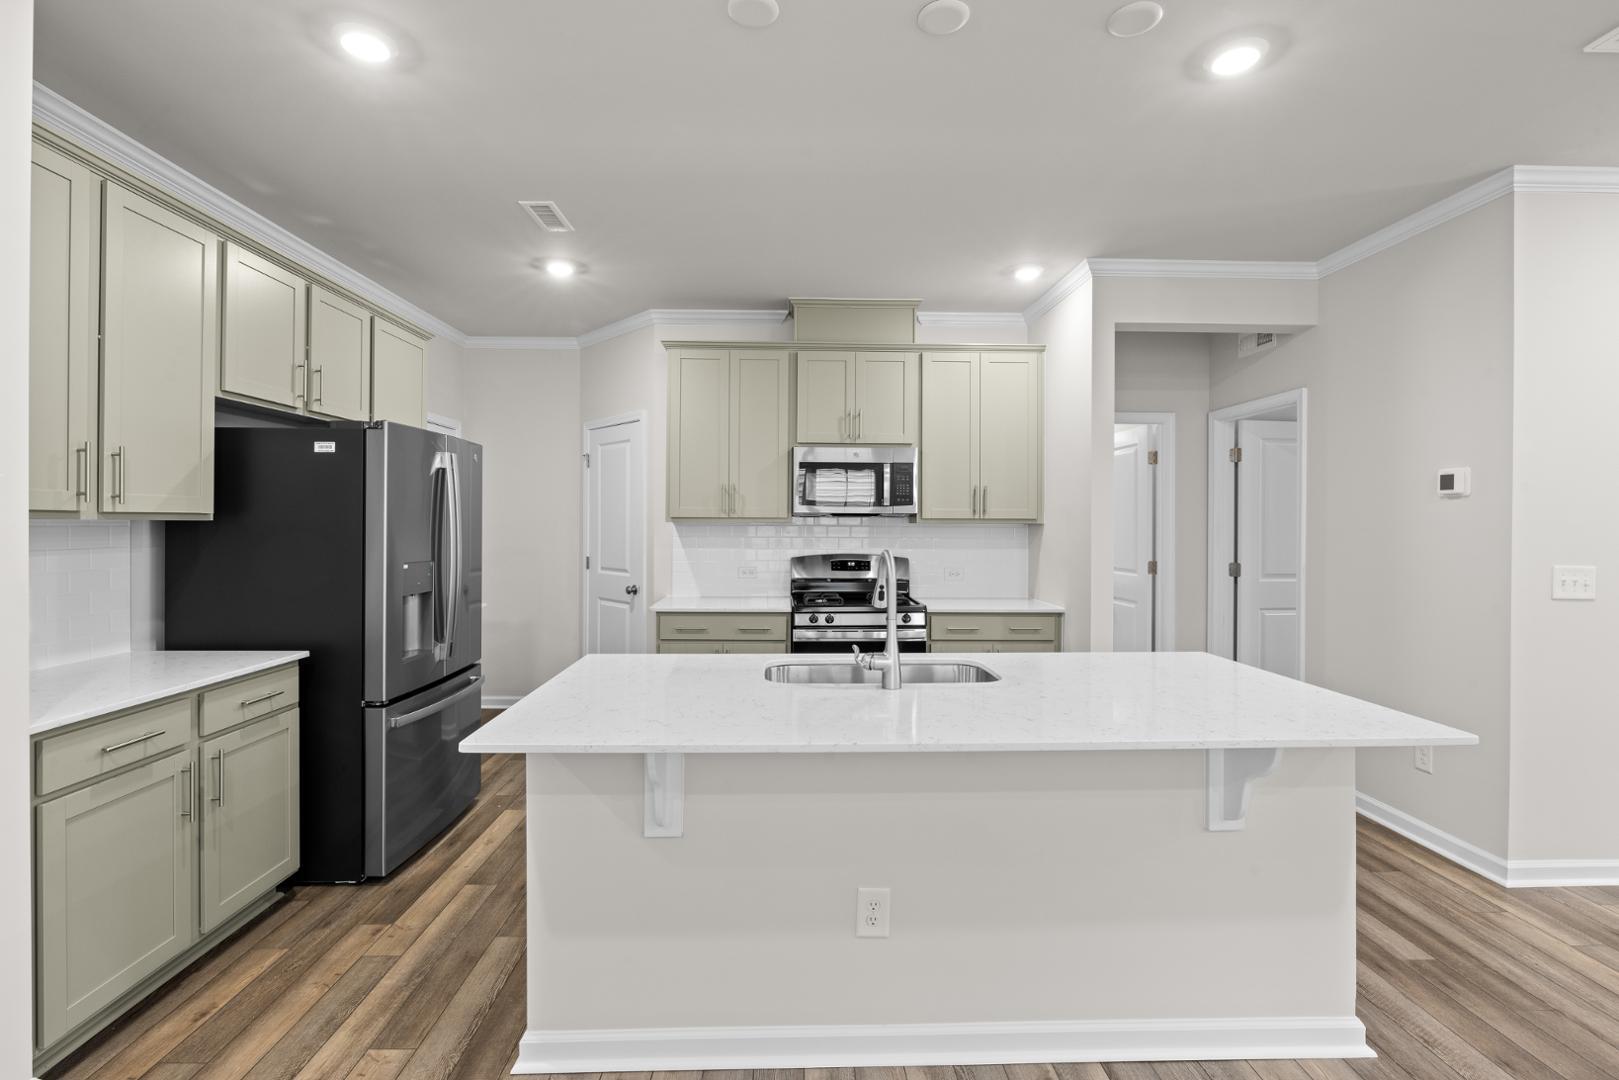 a kitchen with kitchen island a counter top space cabinets stainless steel appliances and cabinets